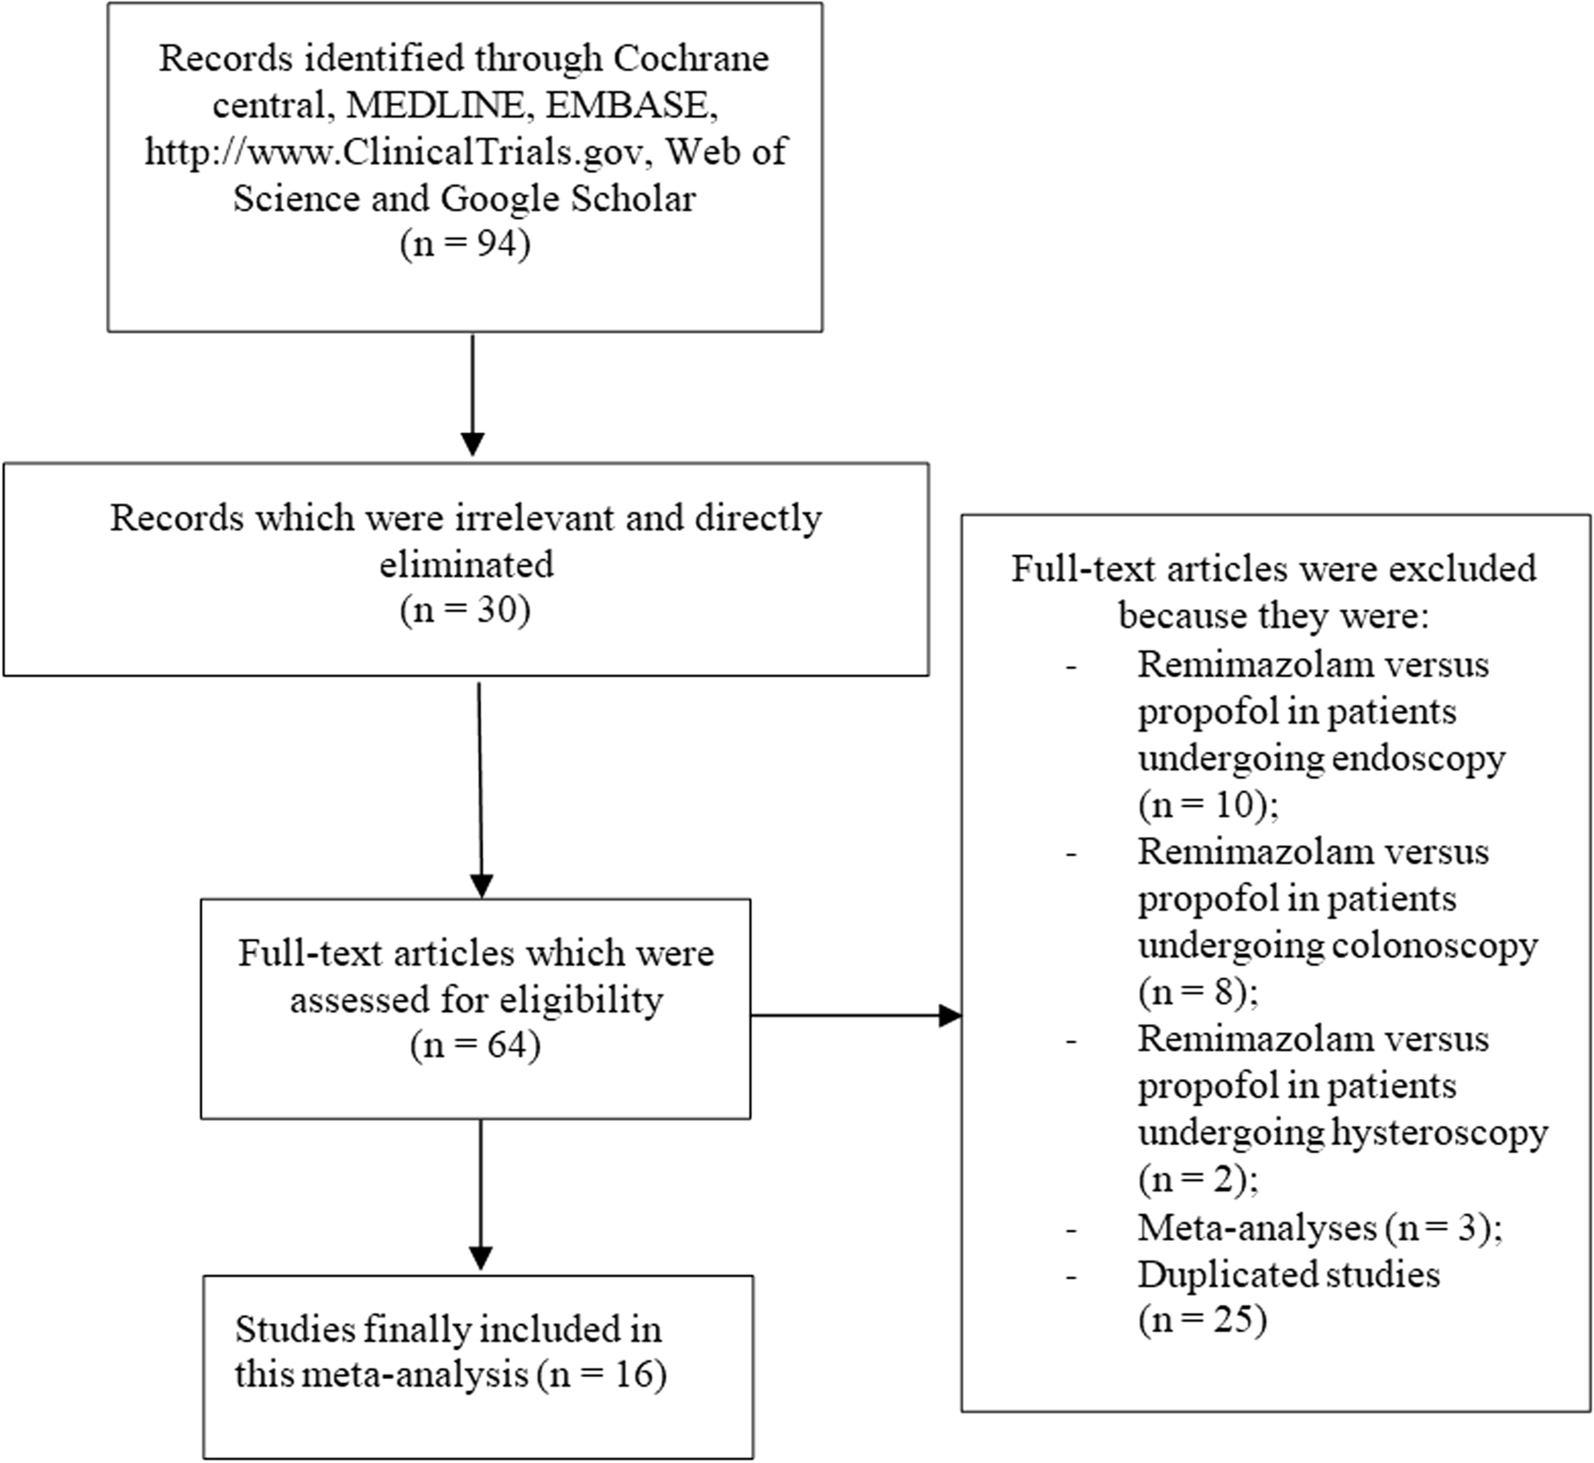 Adverse Drug Events Observed with the Newly Approved Remimazolam in Comparison to Propofol for General Anesthesia in Patients Undergoing Surgery: A Meta-analysis